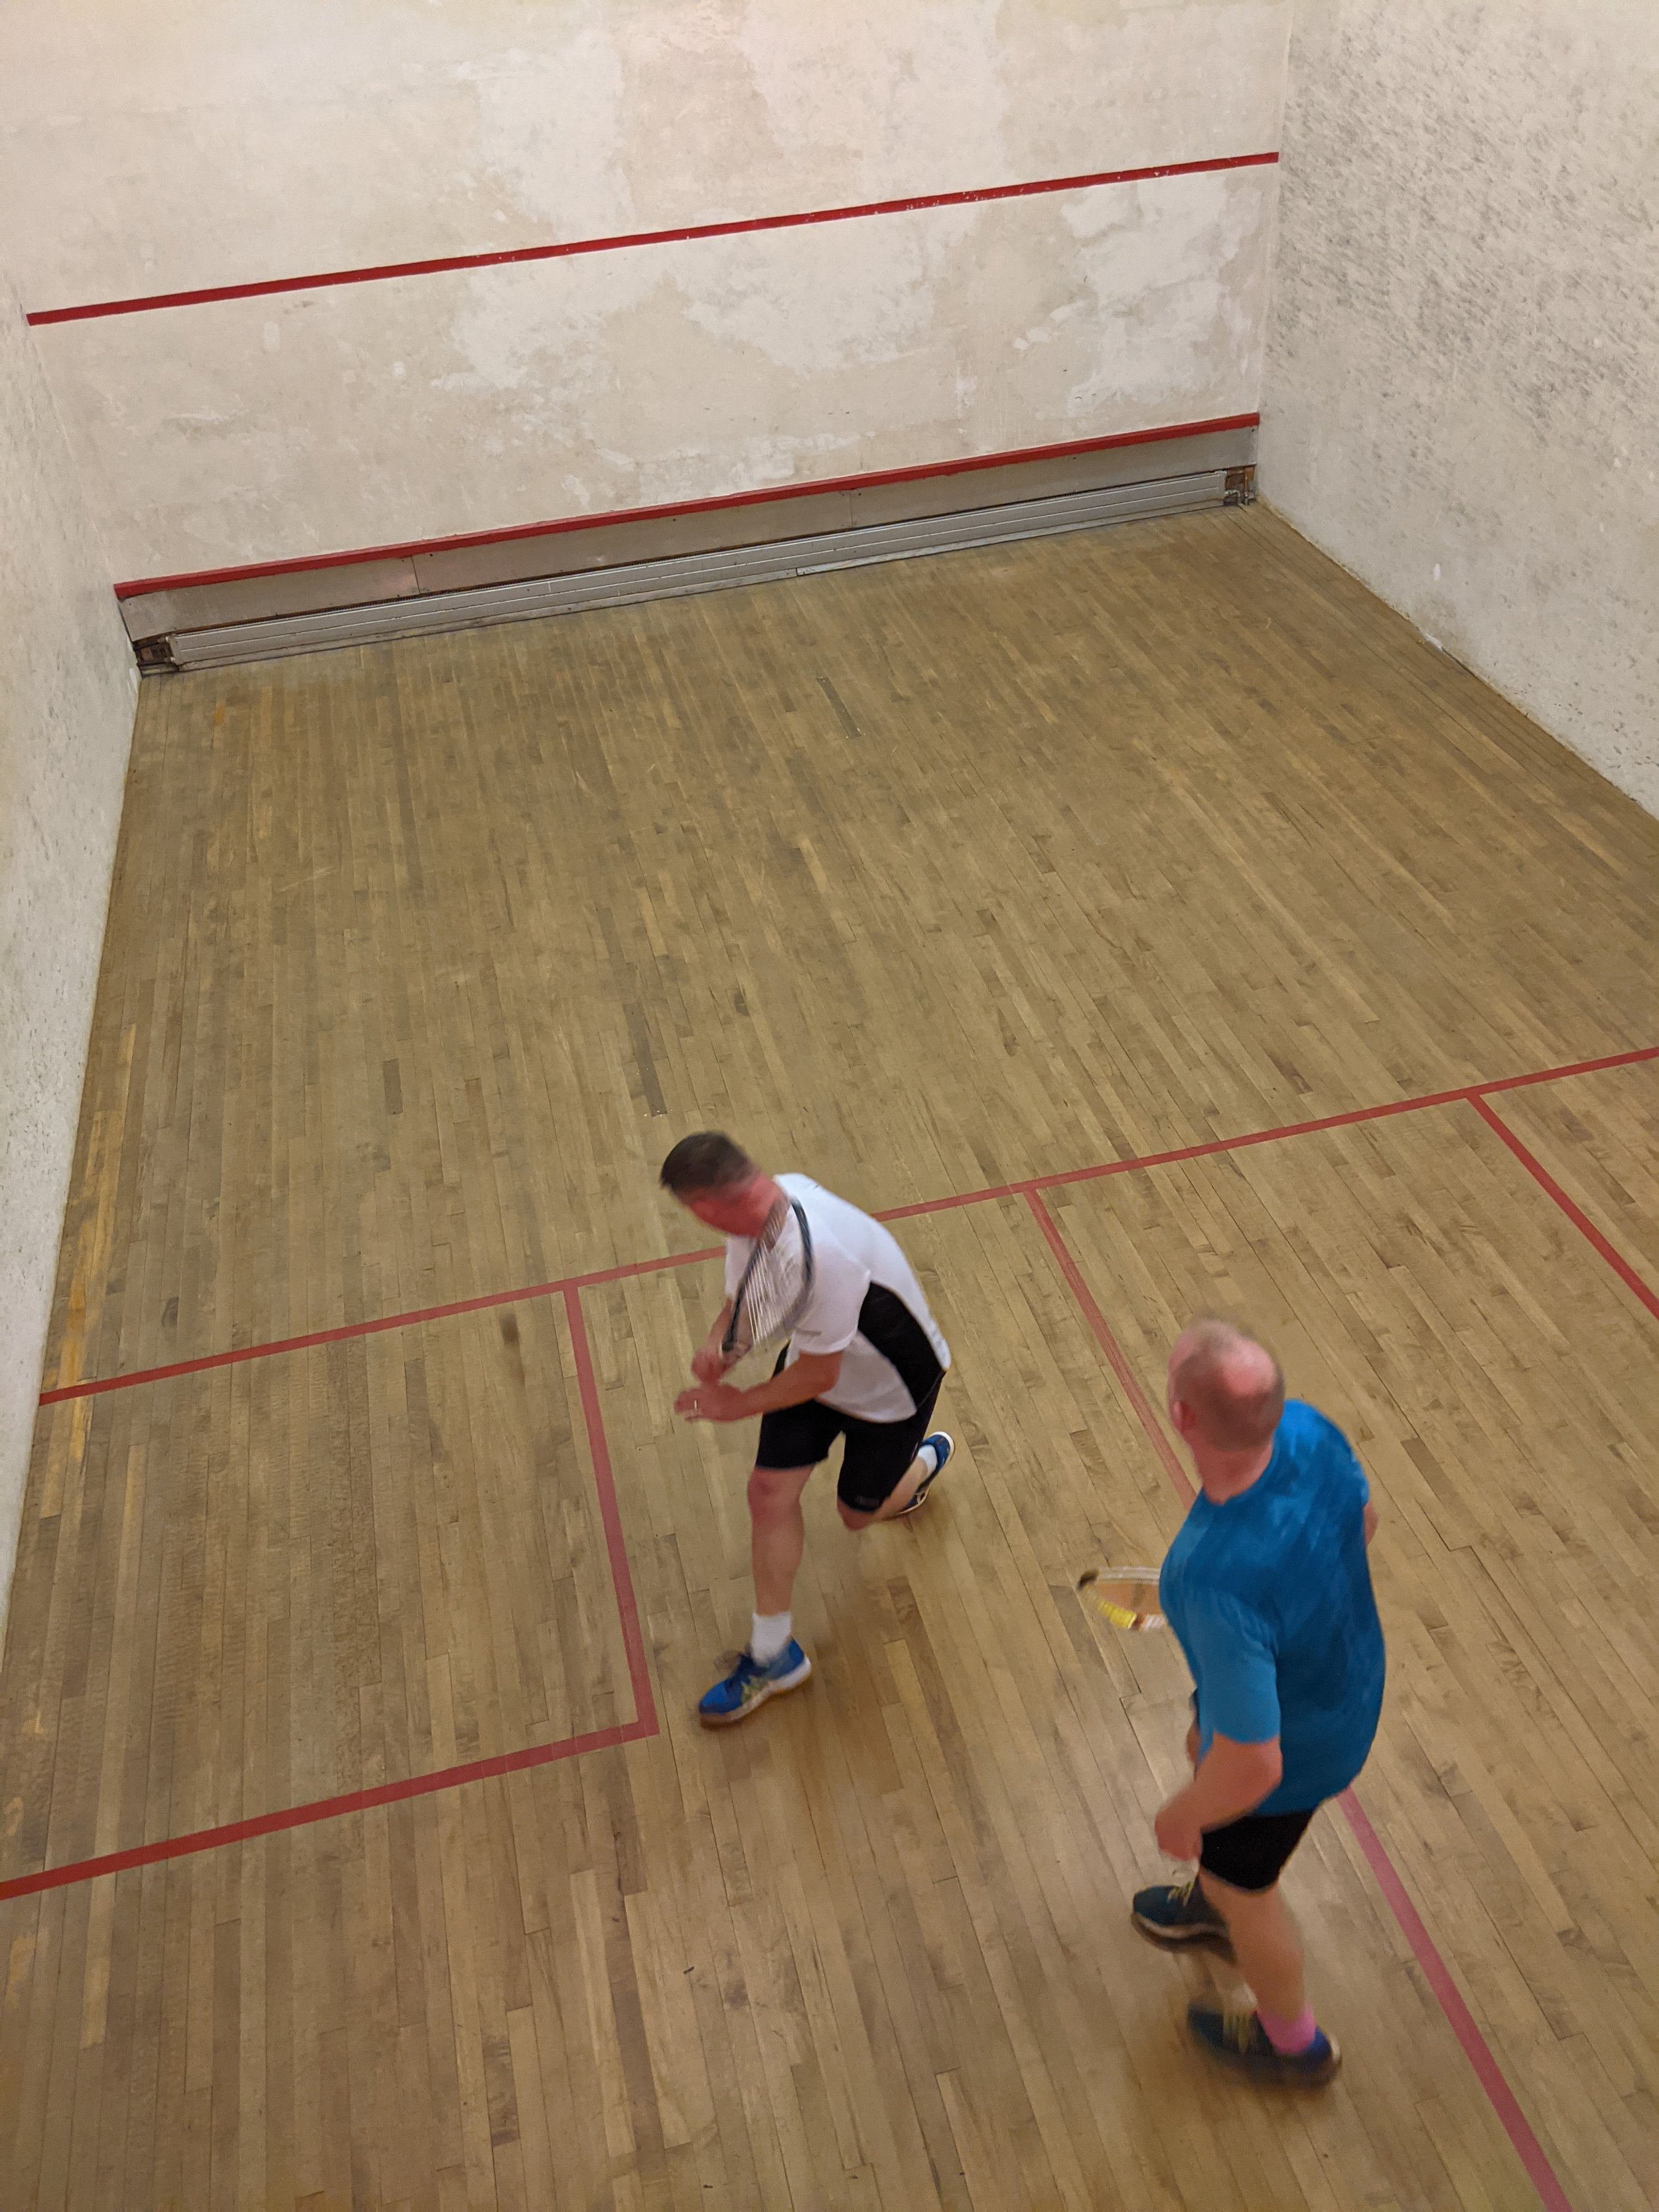 OUR SQUASH COURTS